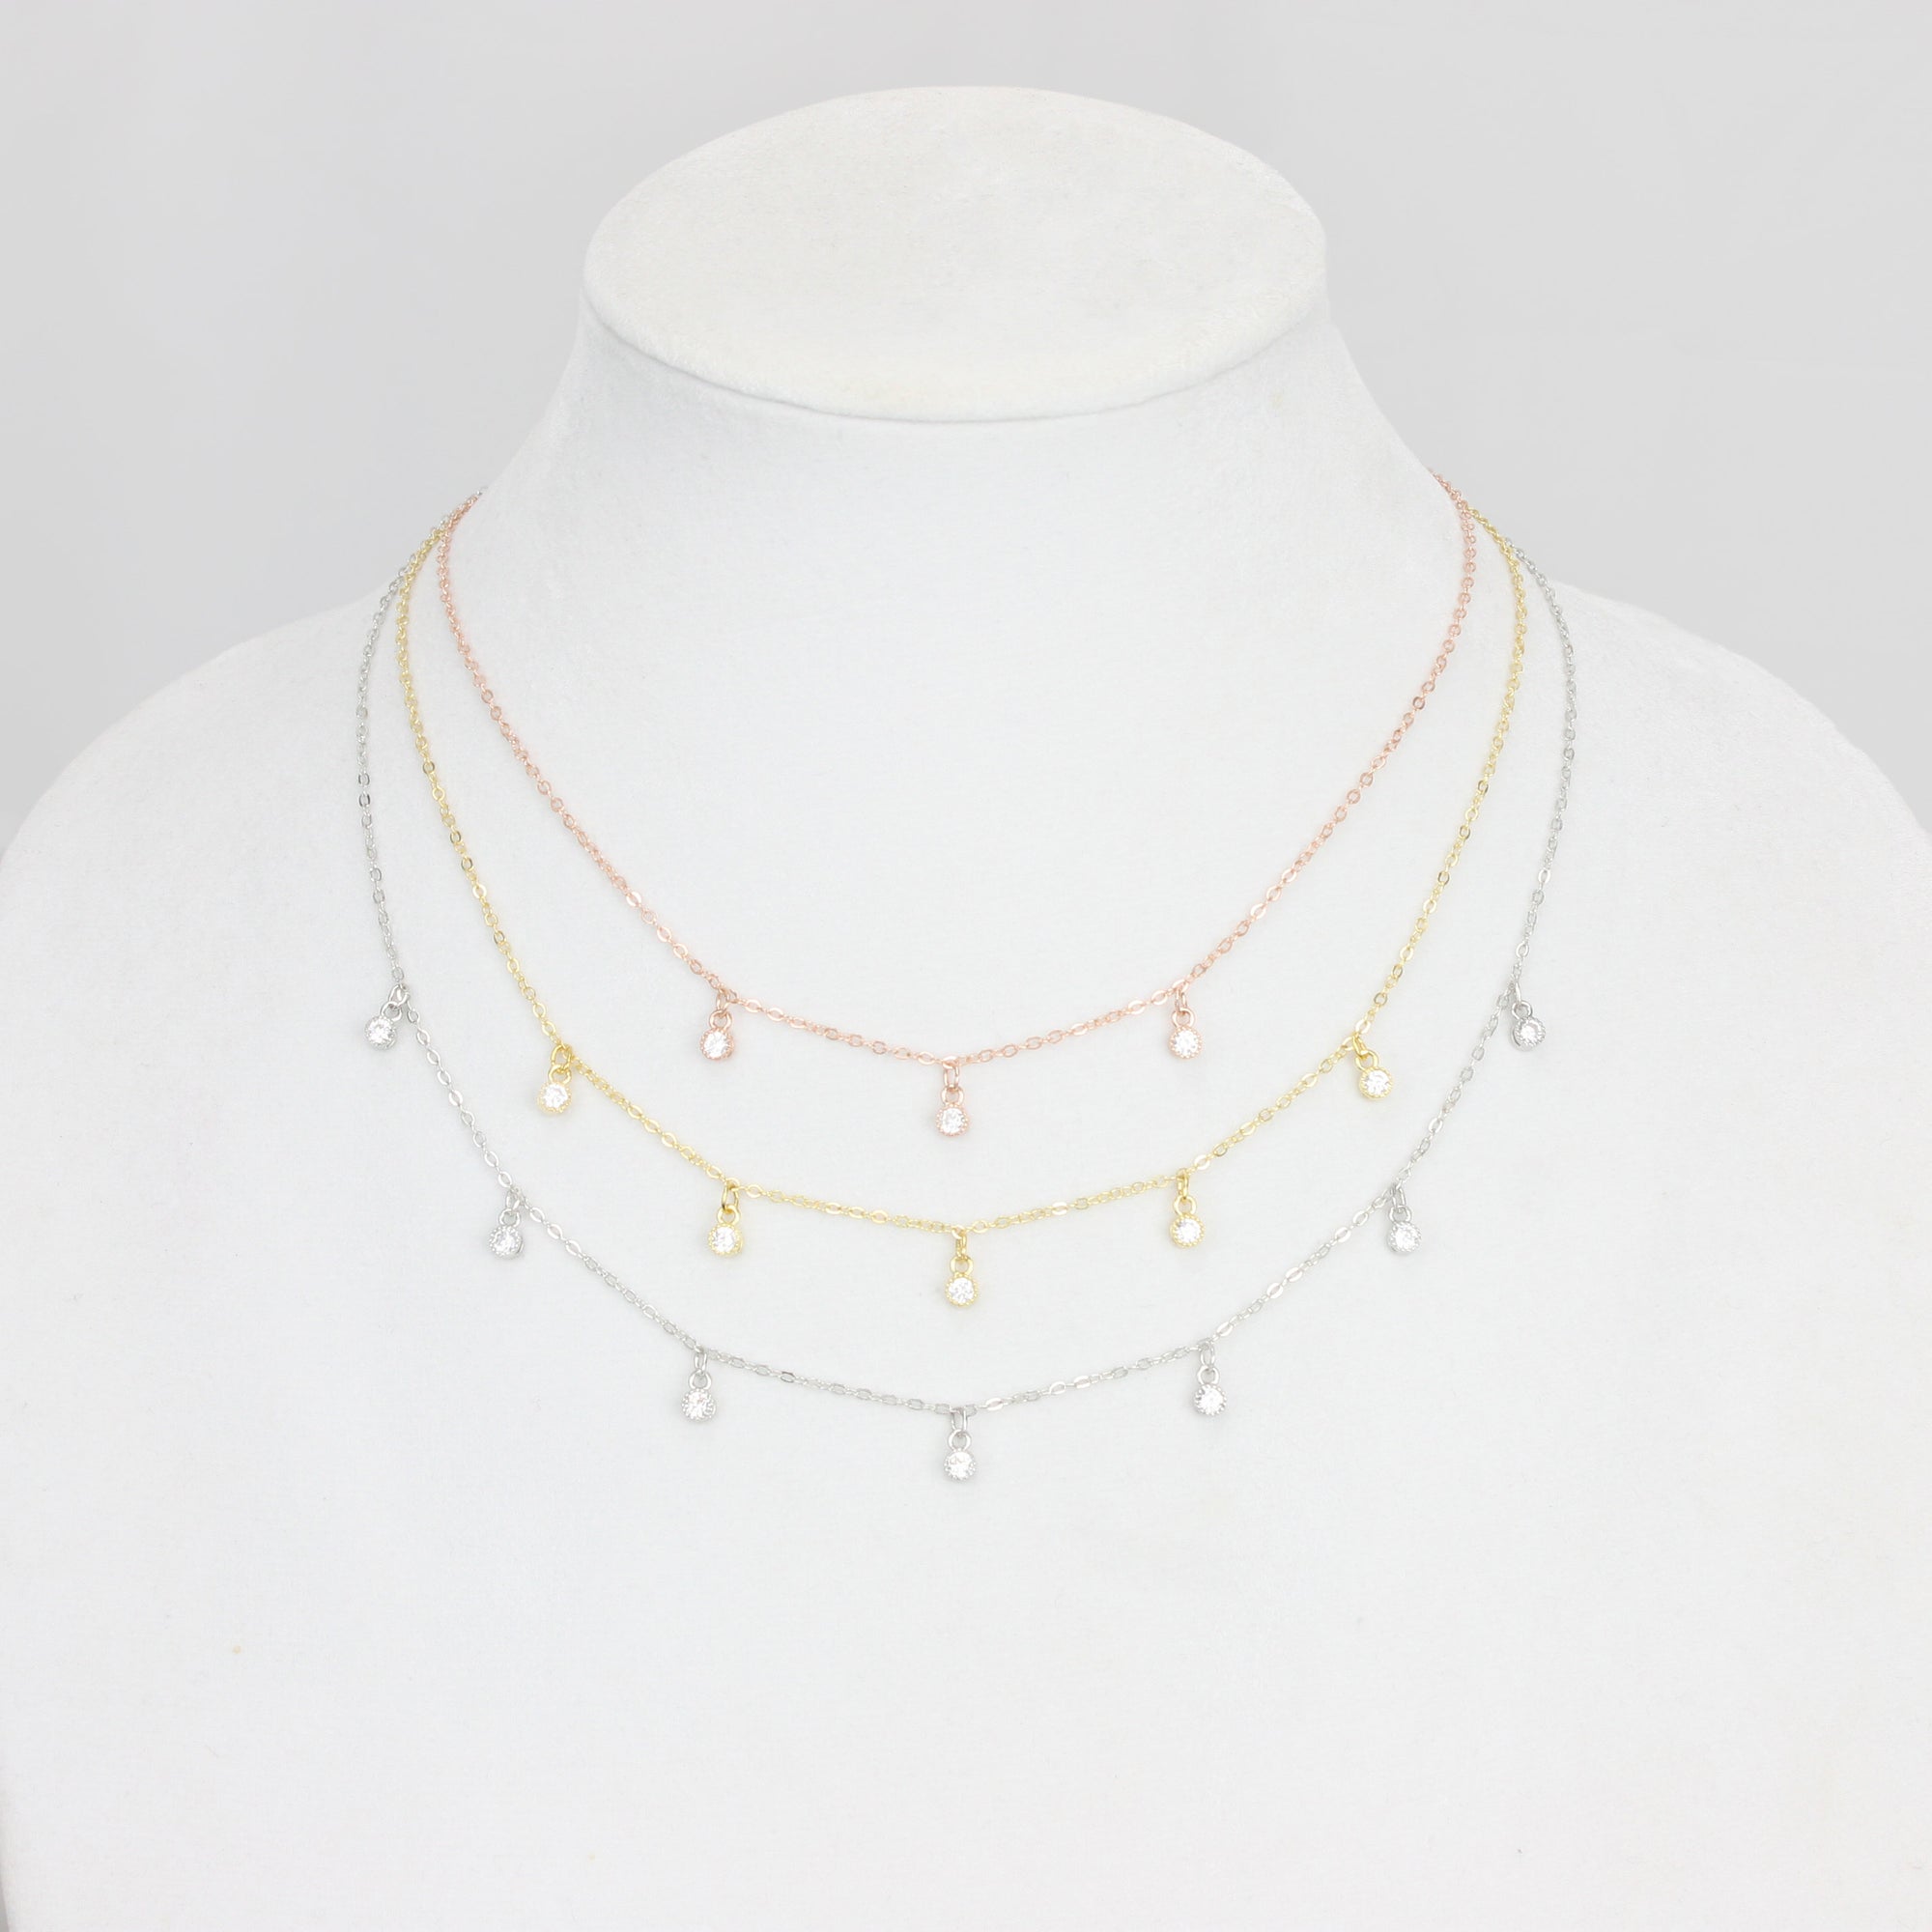 Dainty Charm Necklace Dangle Choker Drop Necklace (FN-42)